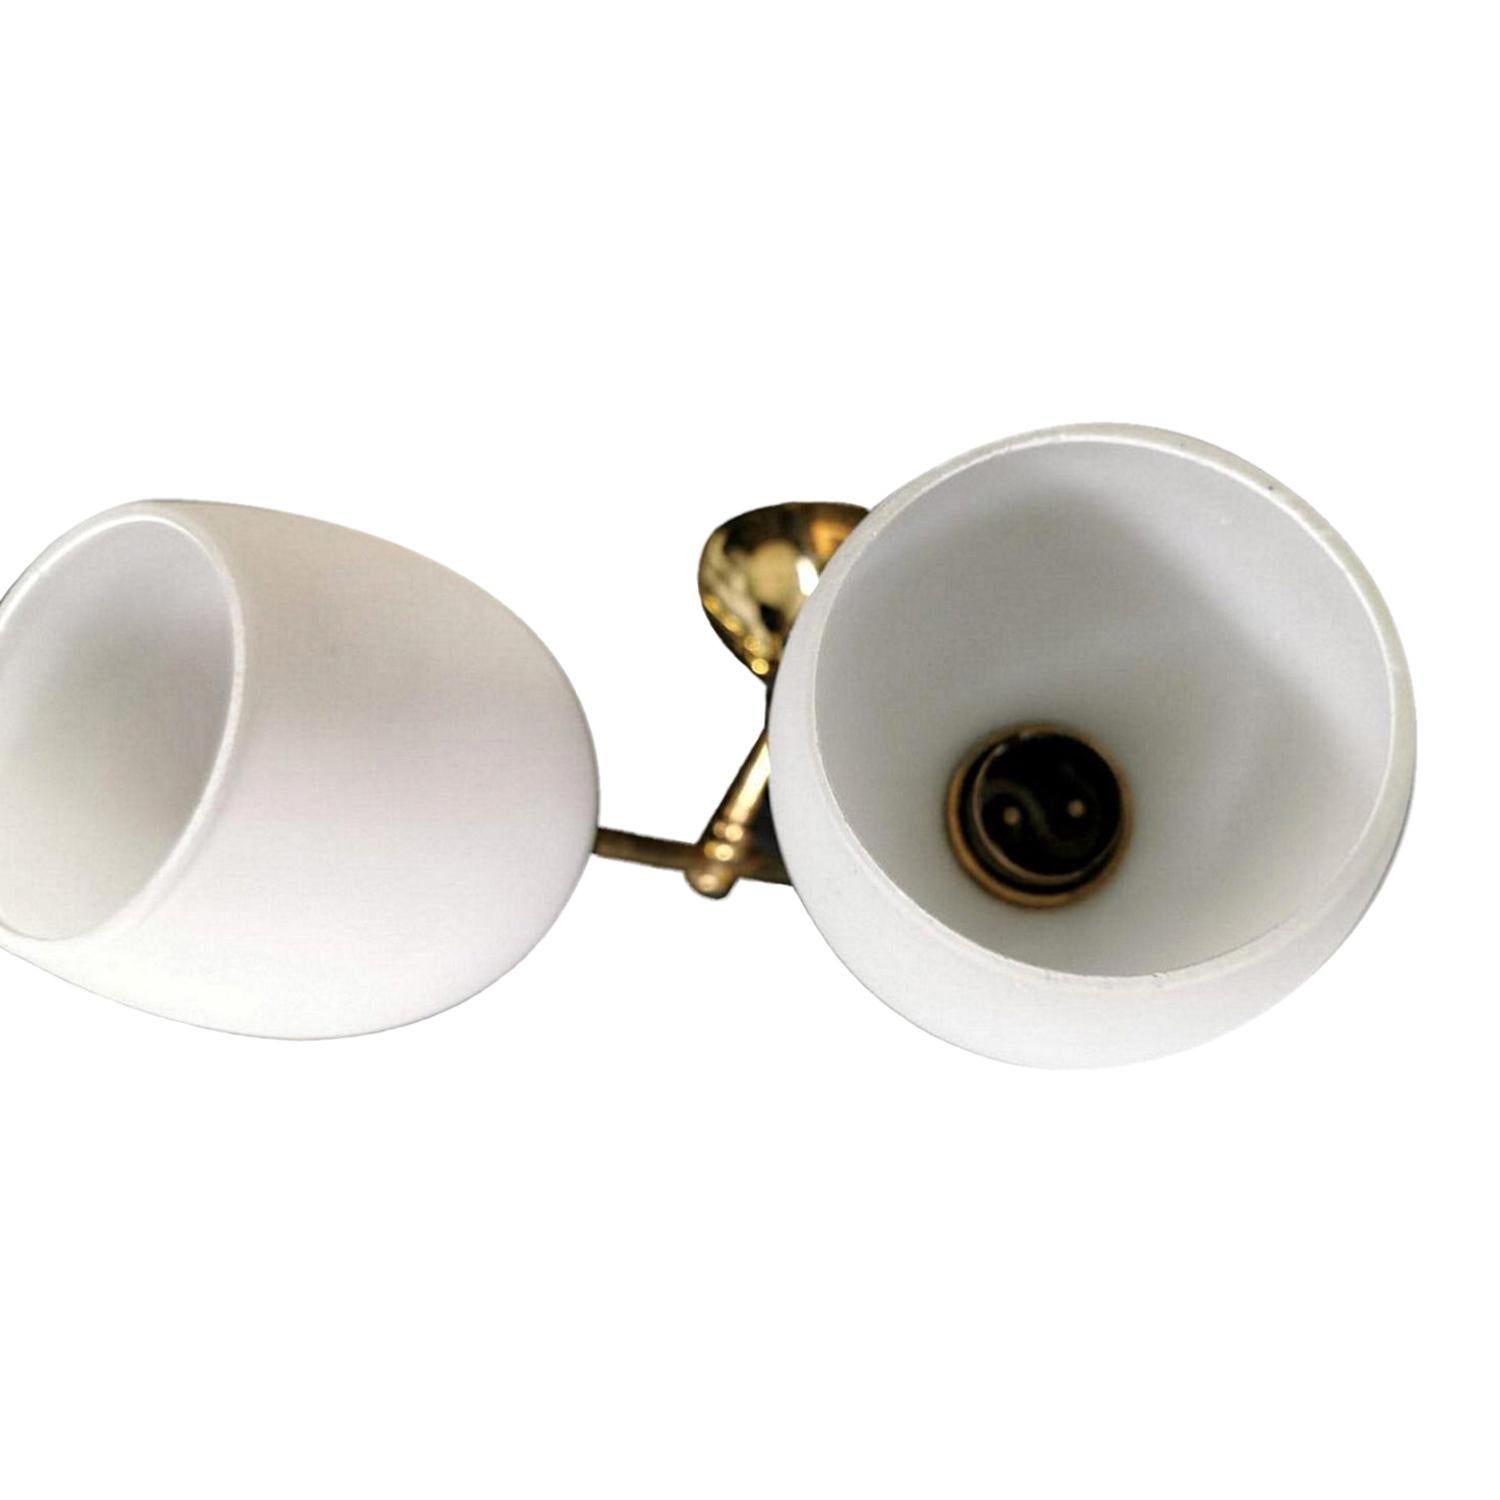 Mid-Century Modern 20th Century Italian Pair of Small Polished Brass, Glass Tulip Wall Sconces For Sale